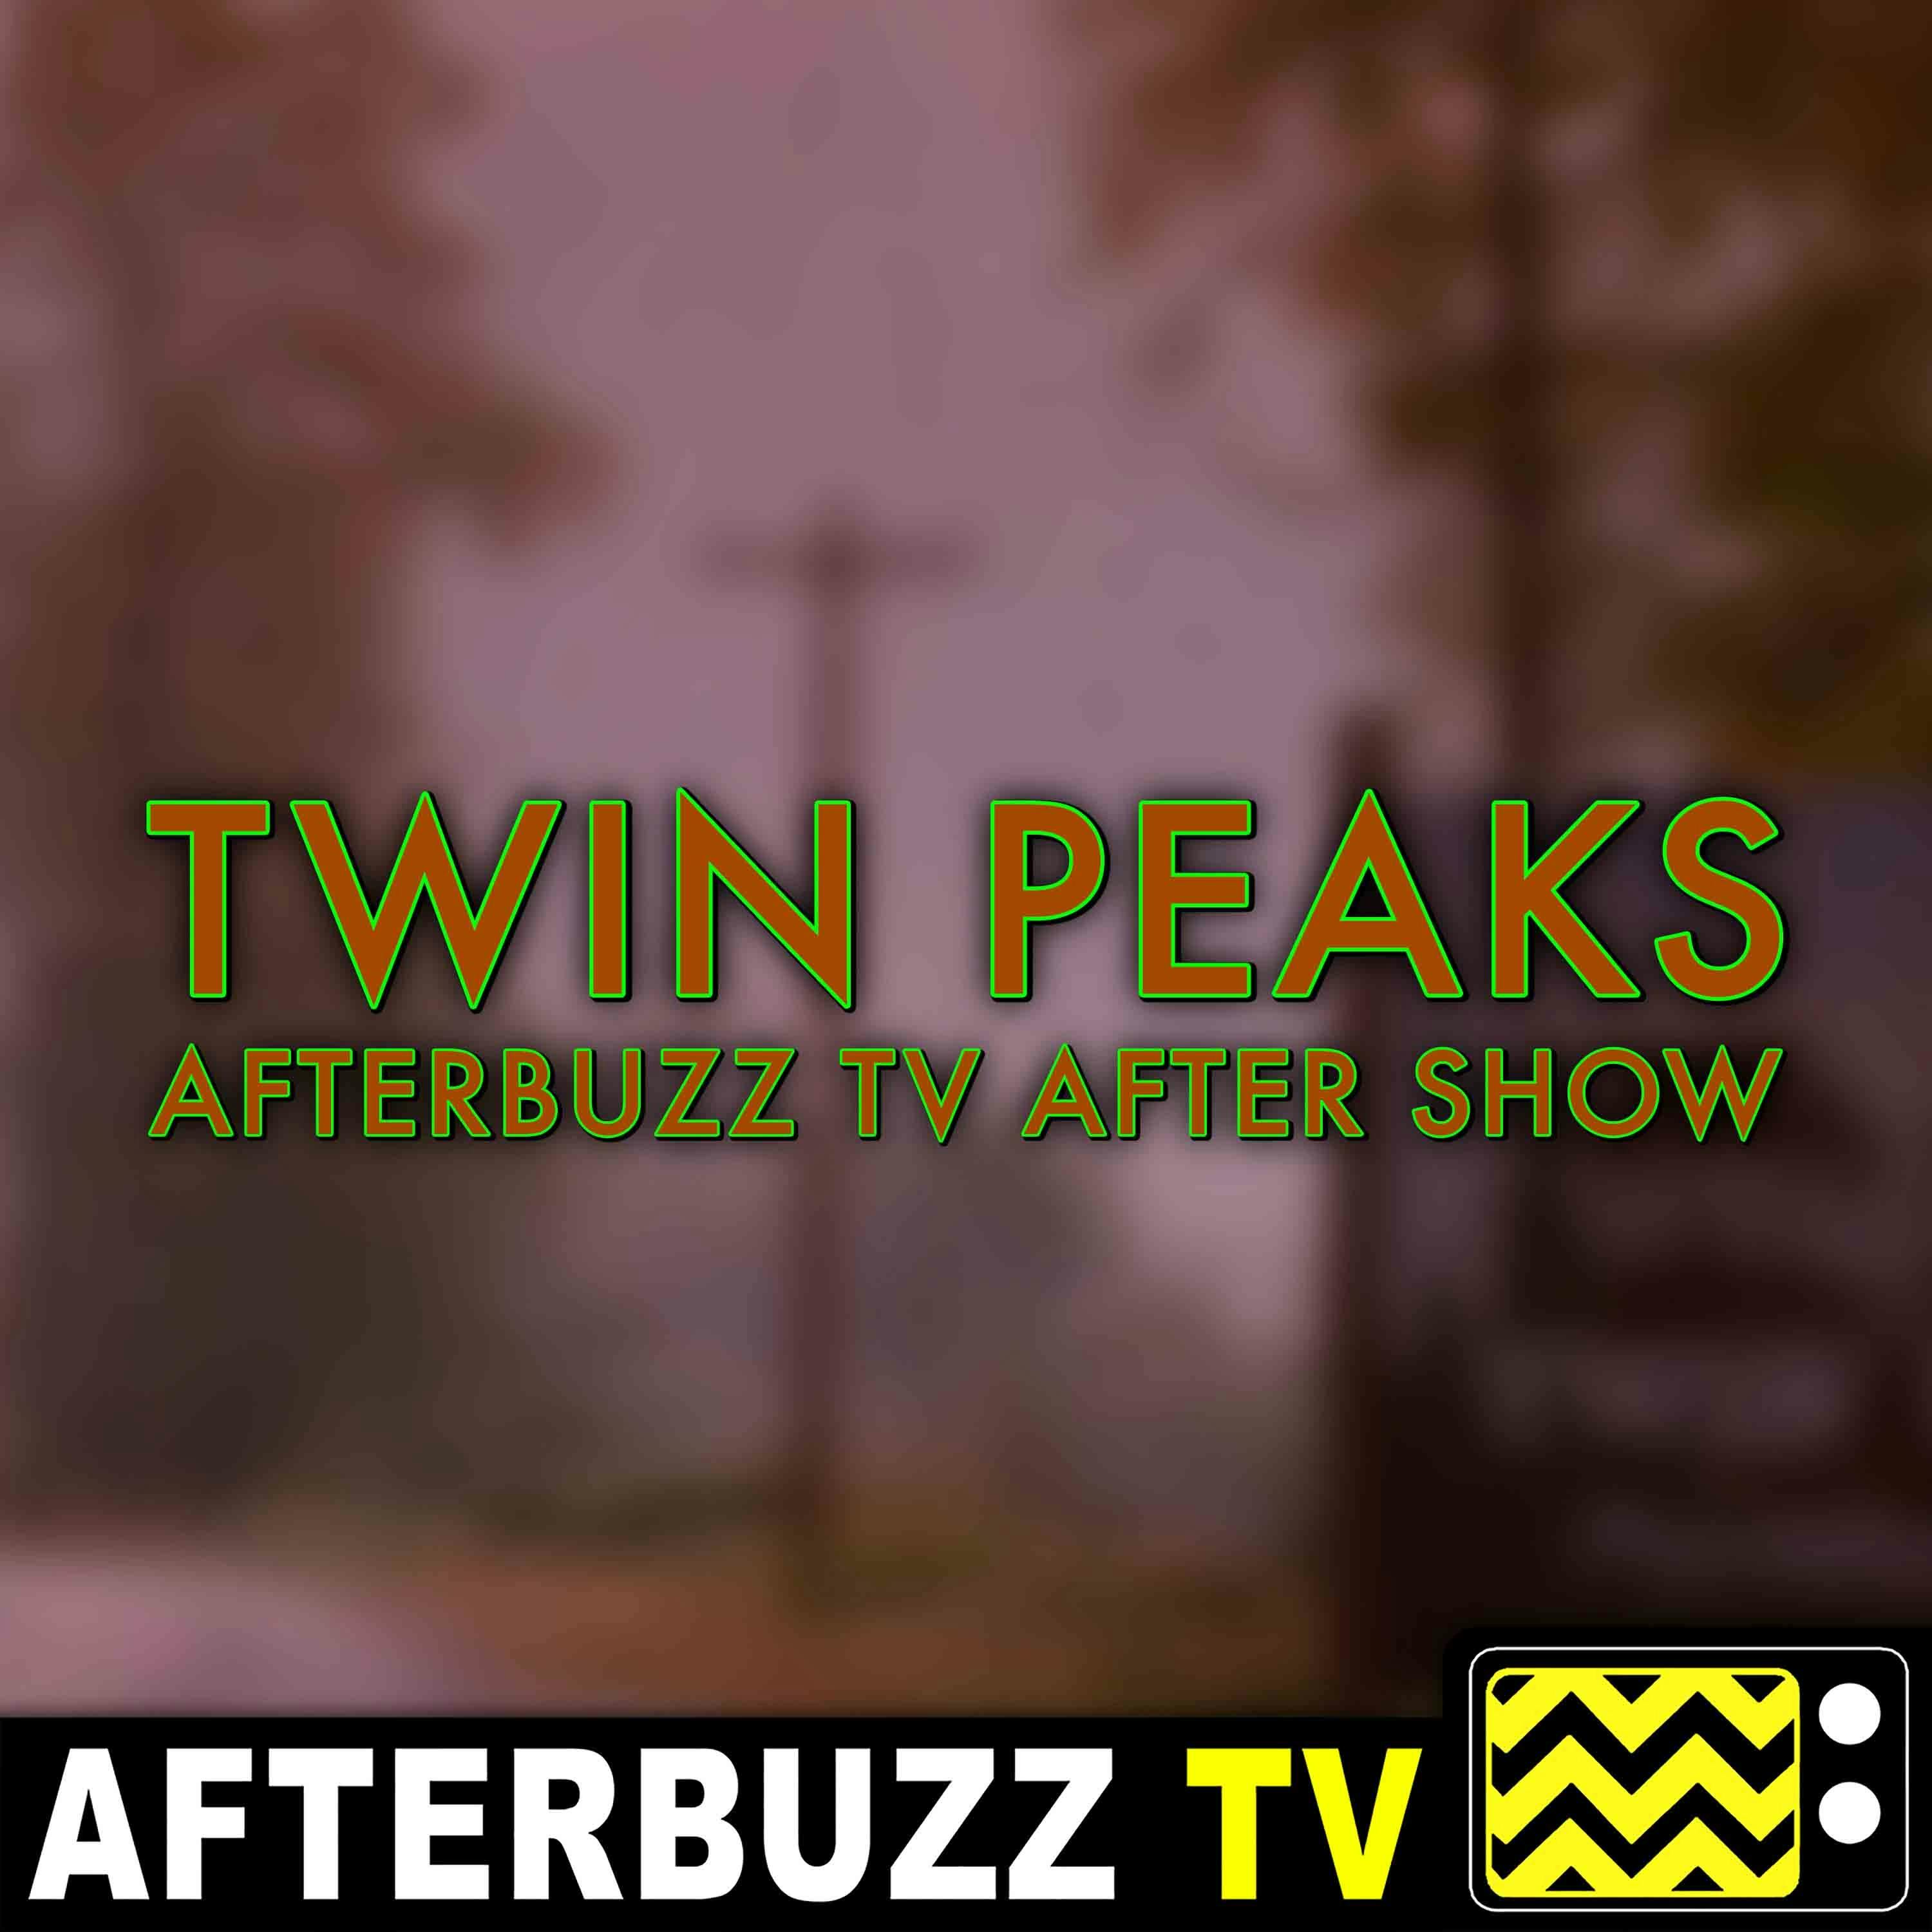 Twin Peaks S:1 | The Return: Part 9 E:9 | AfterBuzz TV AfterShow